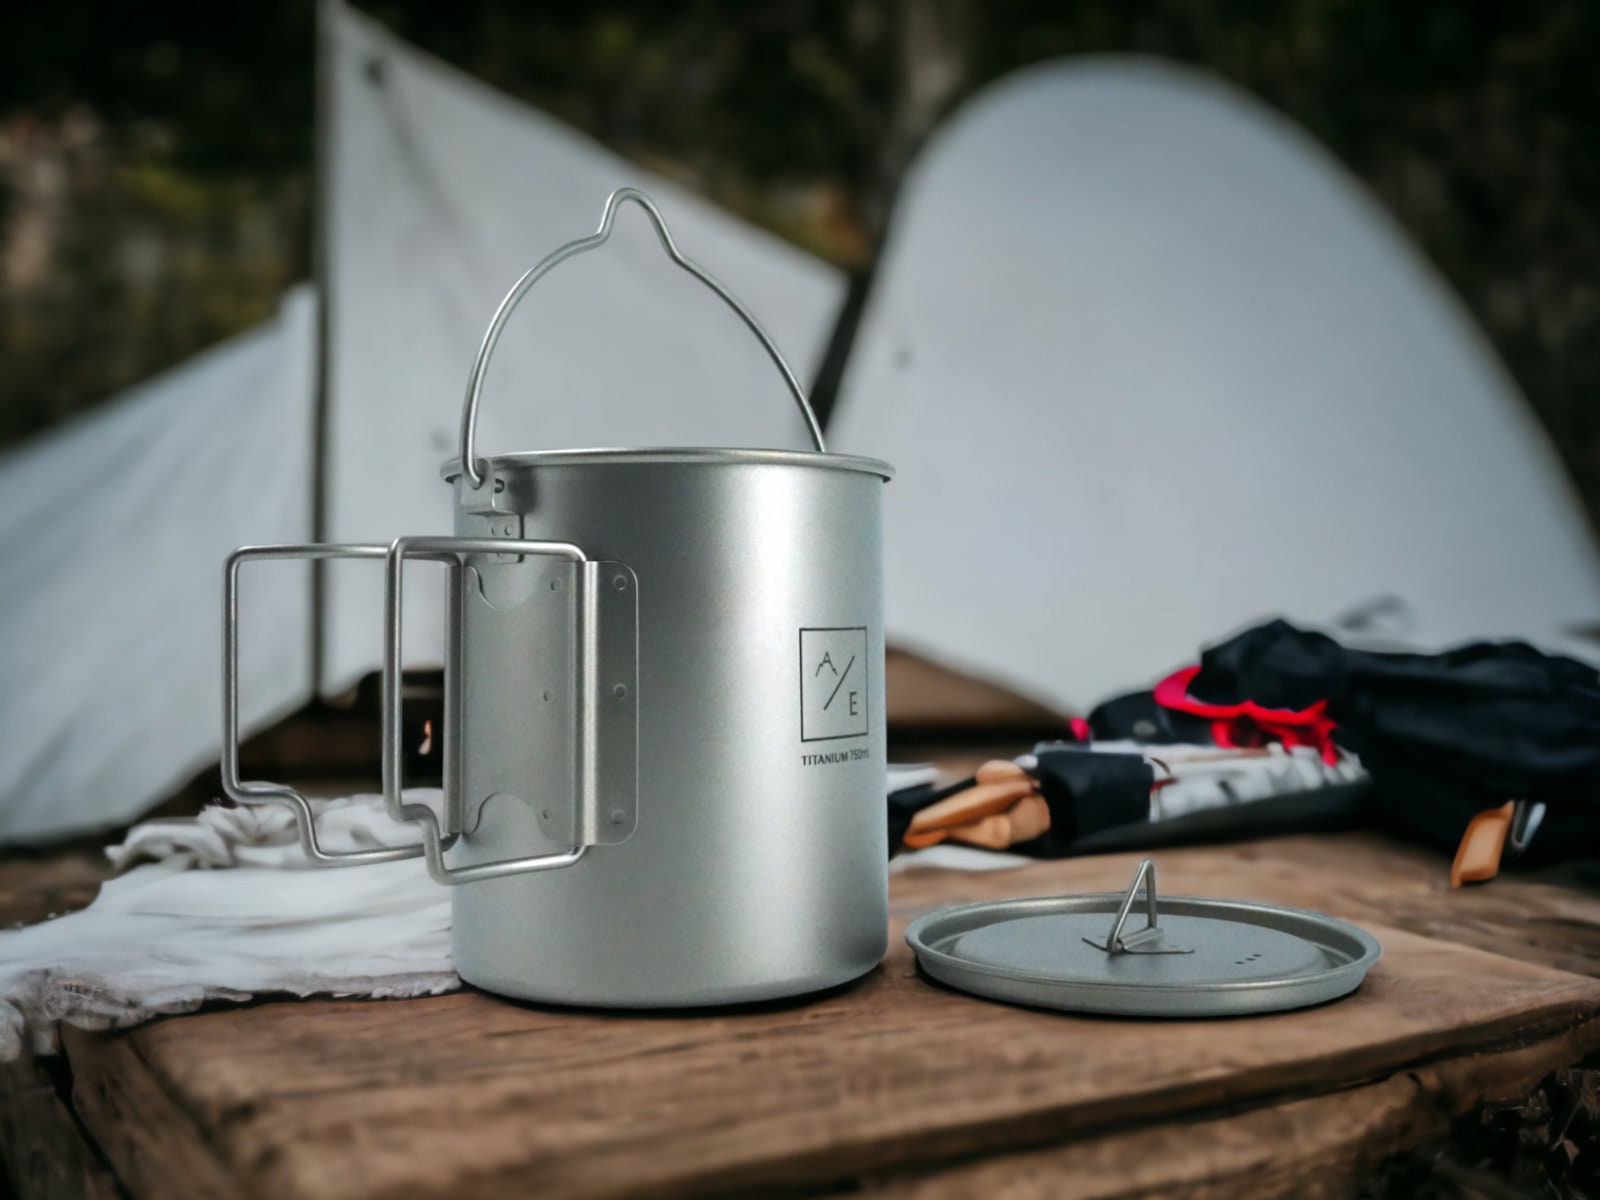 Valtcan Titanium Camping Cup with Lid 450ml